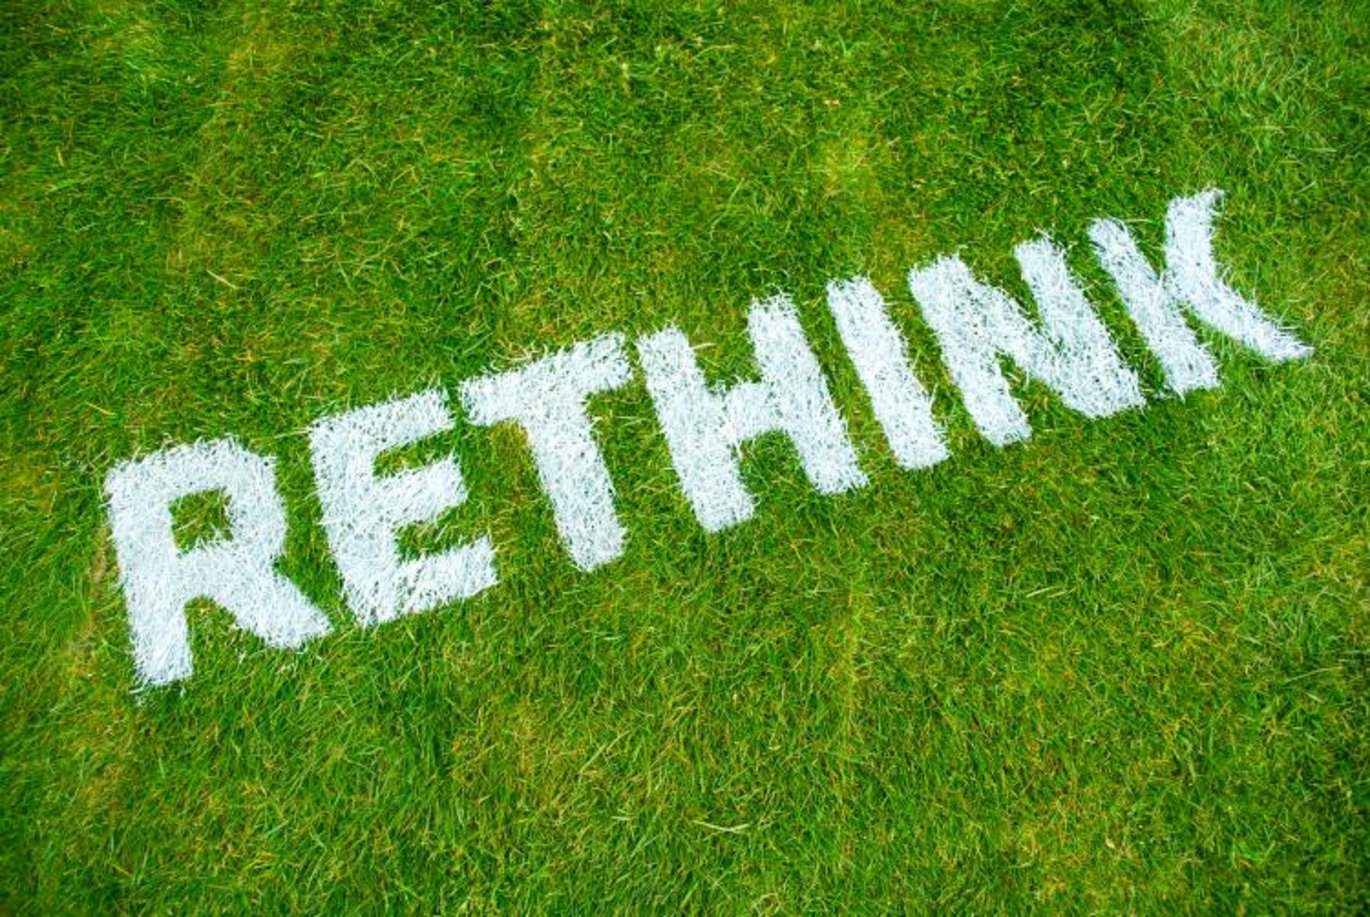 [Translate to English:] Image of green grass with "Rethink" written over.